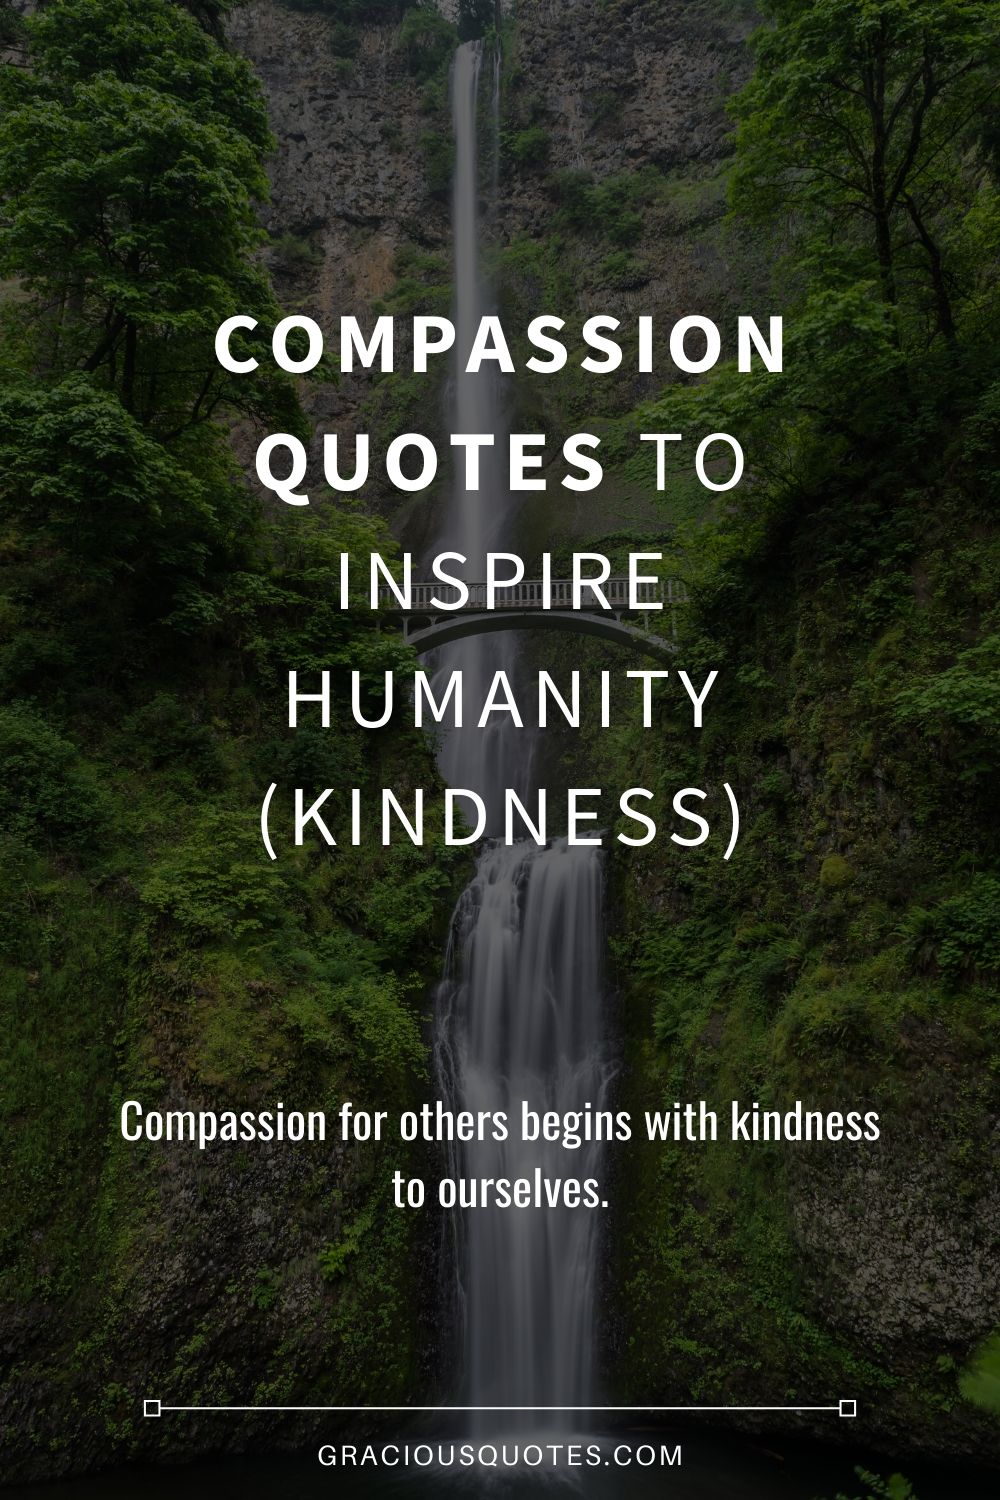 62 Compassion Quotes to Inspire Humanity (KINDNESS)